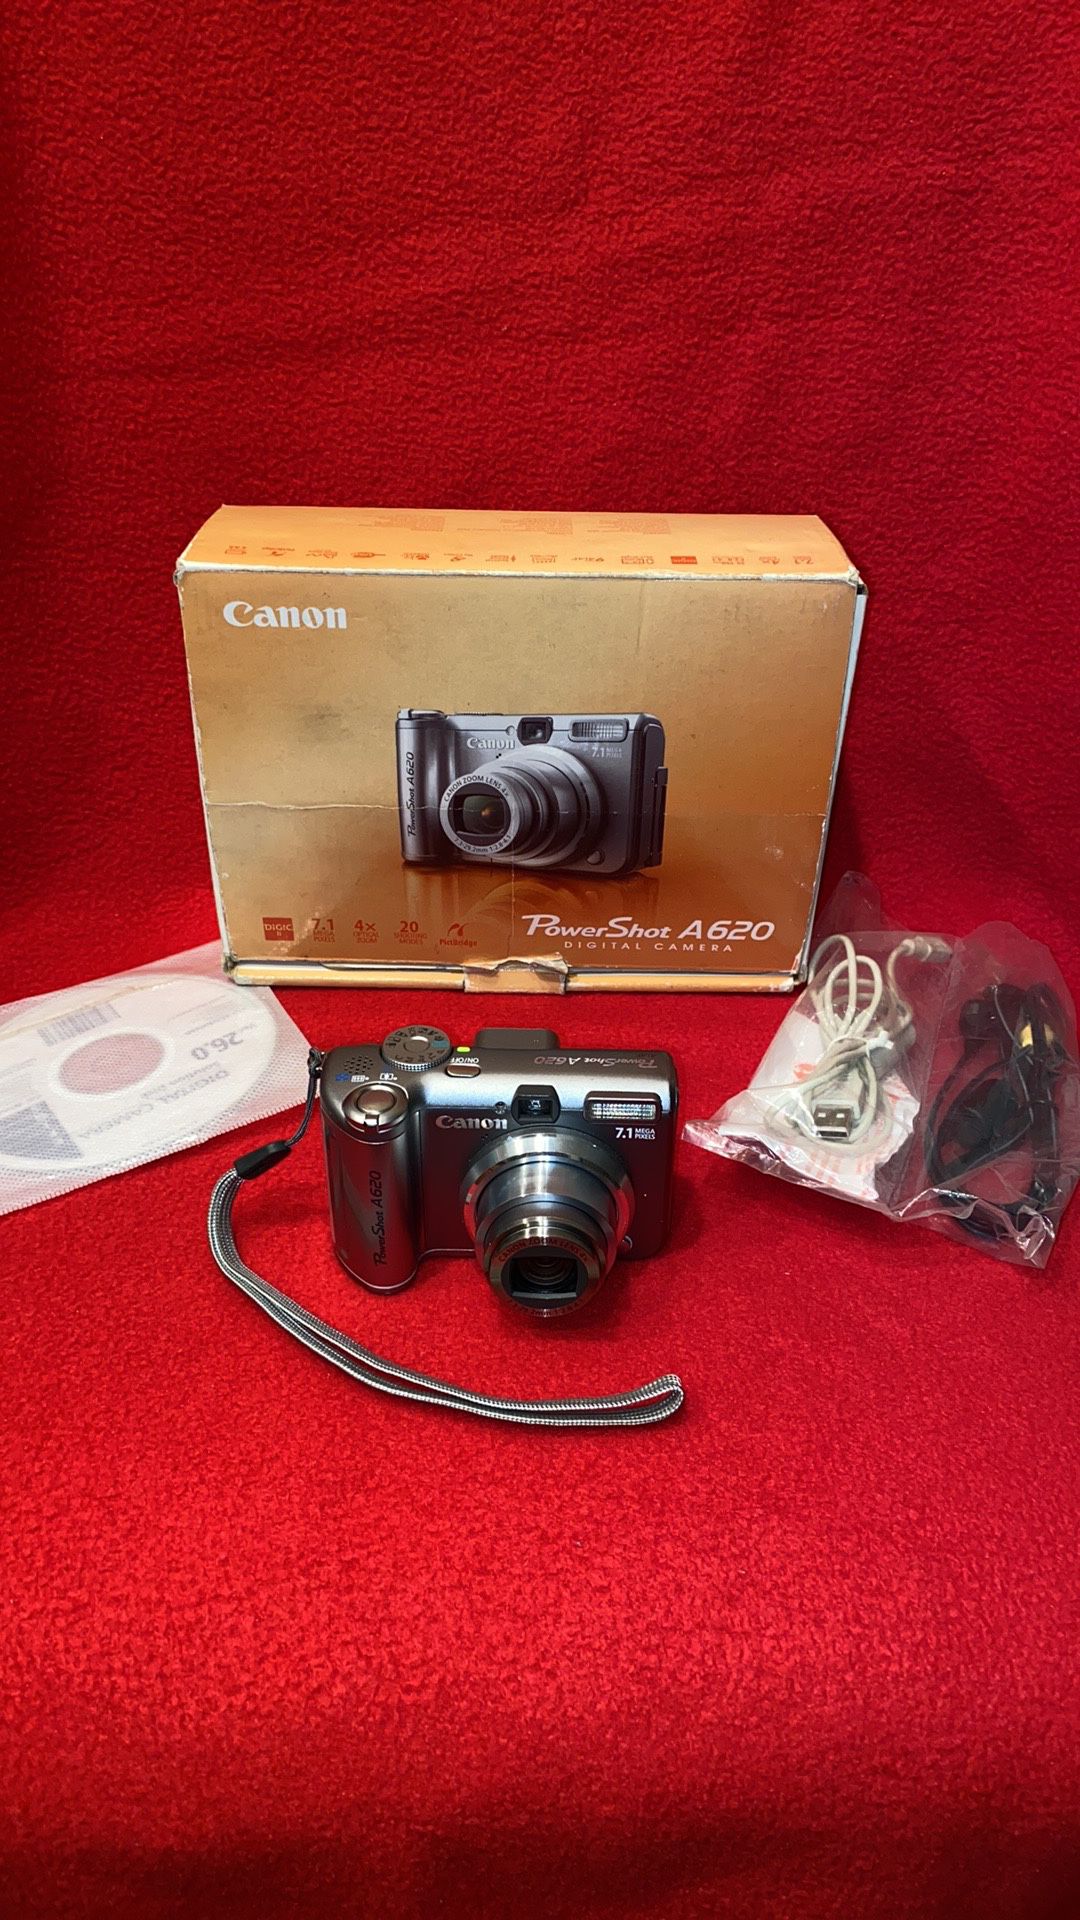 Canon PowerShot A620 Digital Camera 7.1 Megapixels With 4X Optical Zoom